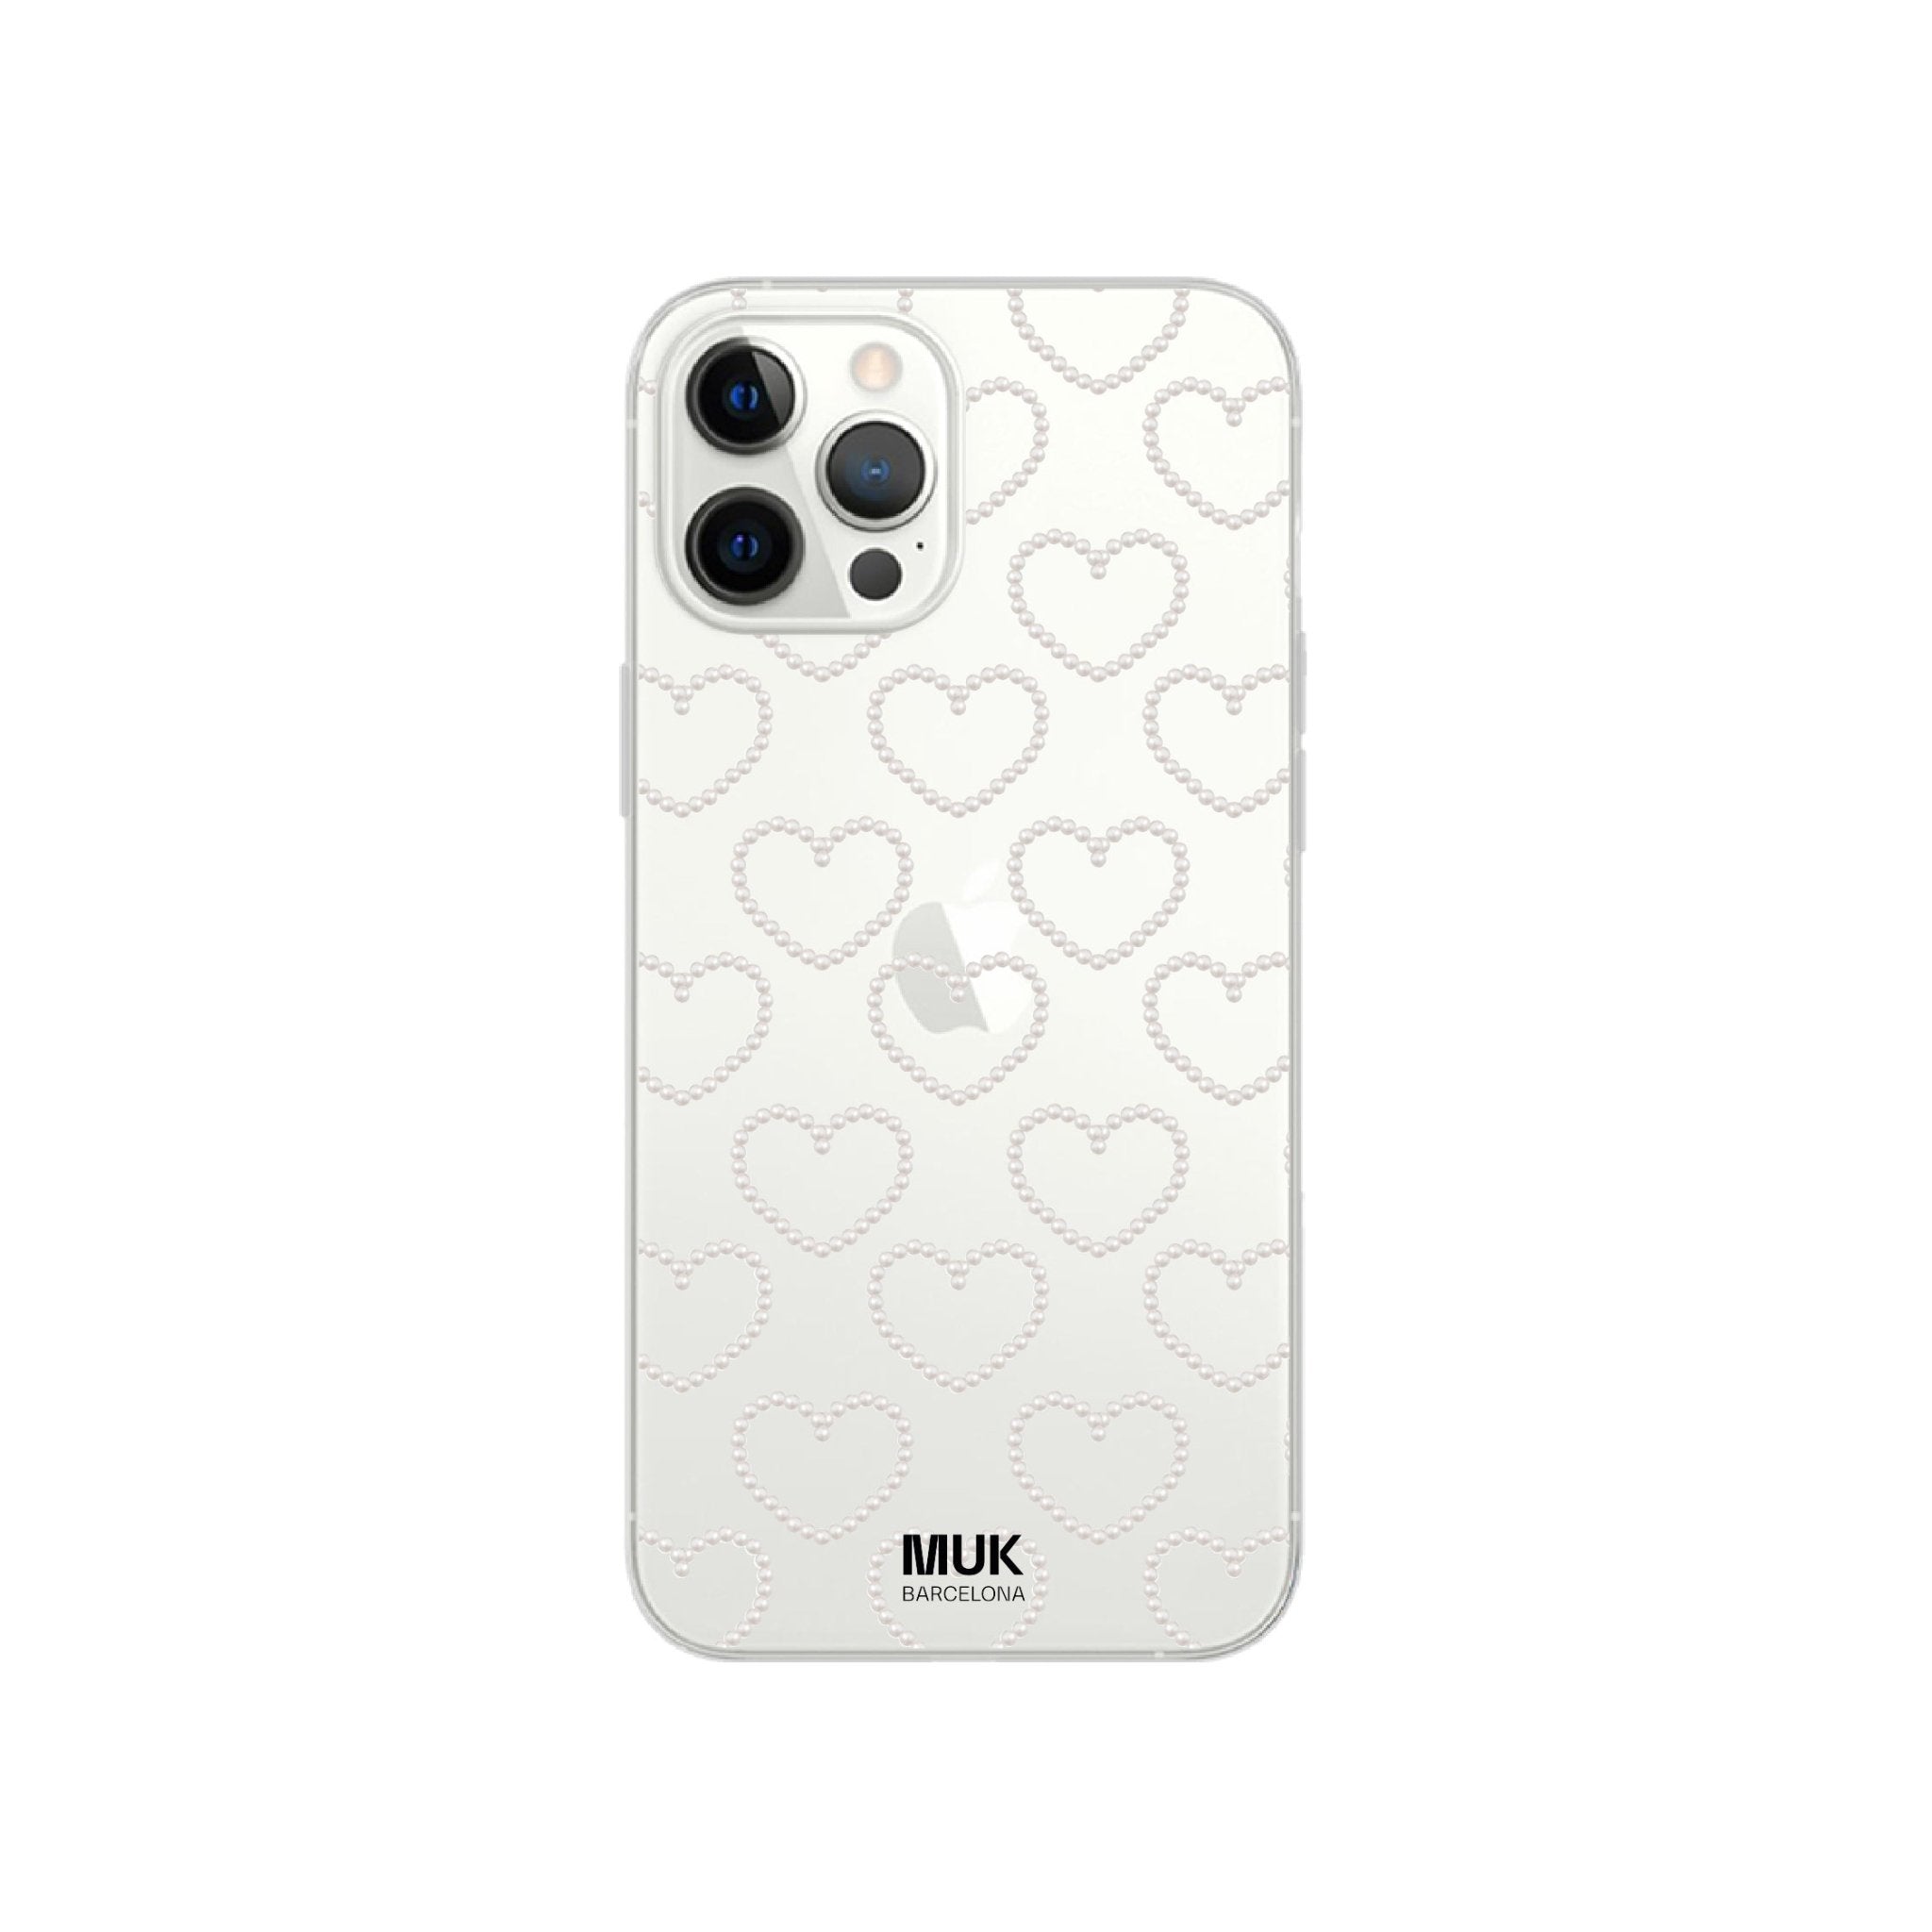 Clear TPU cell phone case with pearl hearts print.
